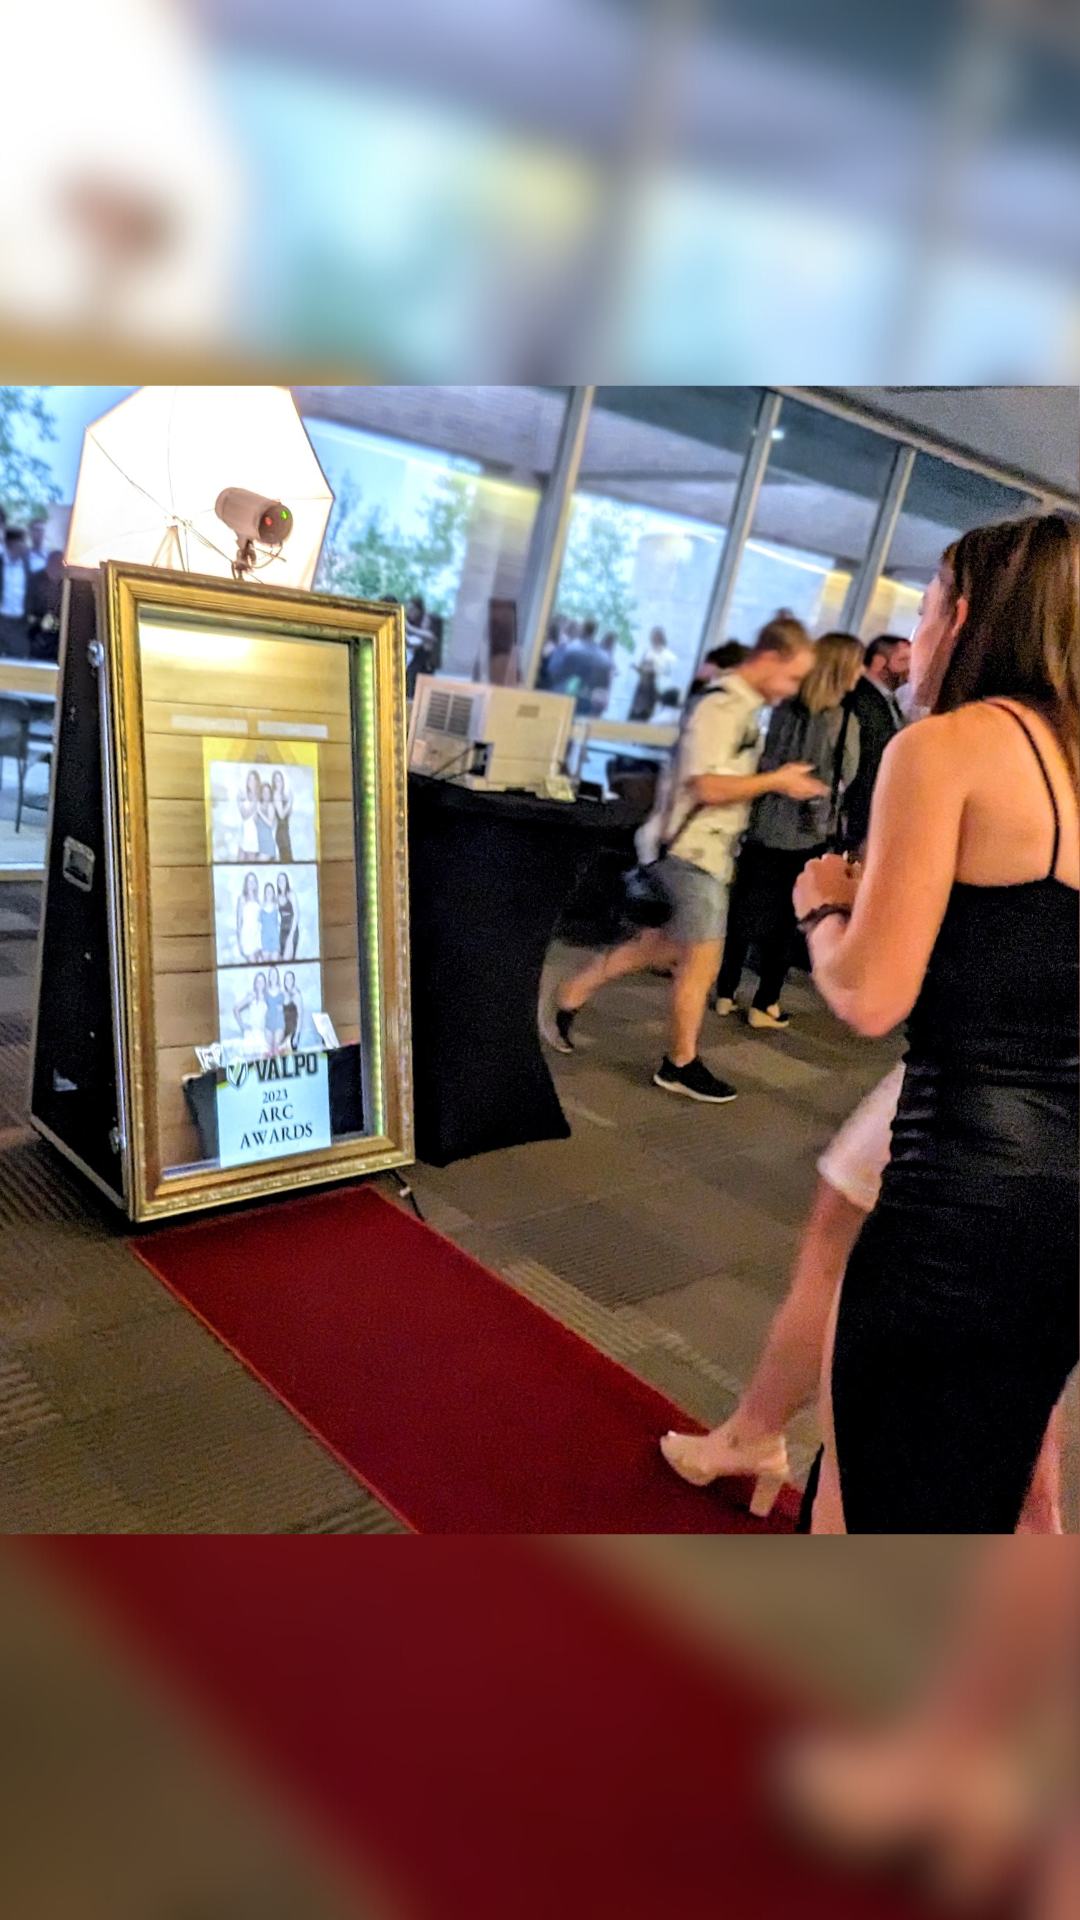 Magic Mirror Photo Booth in use at an awards ceremony in Valparaiso, Indiana